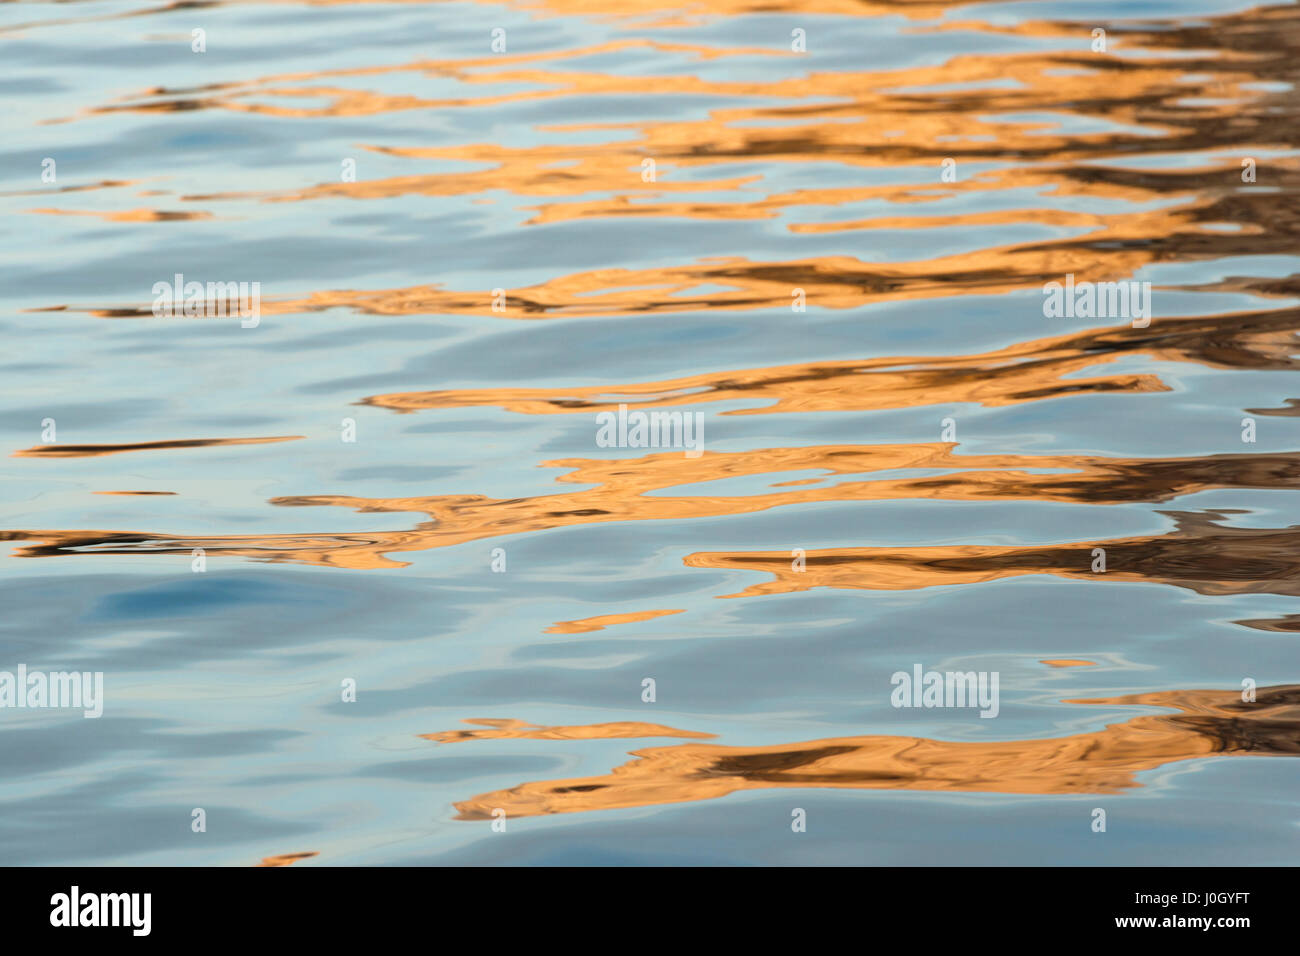 Reflections on Water Surface, Pacific Ocean, USA Stock Photo